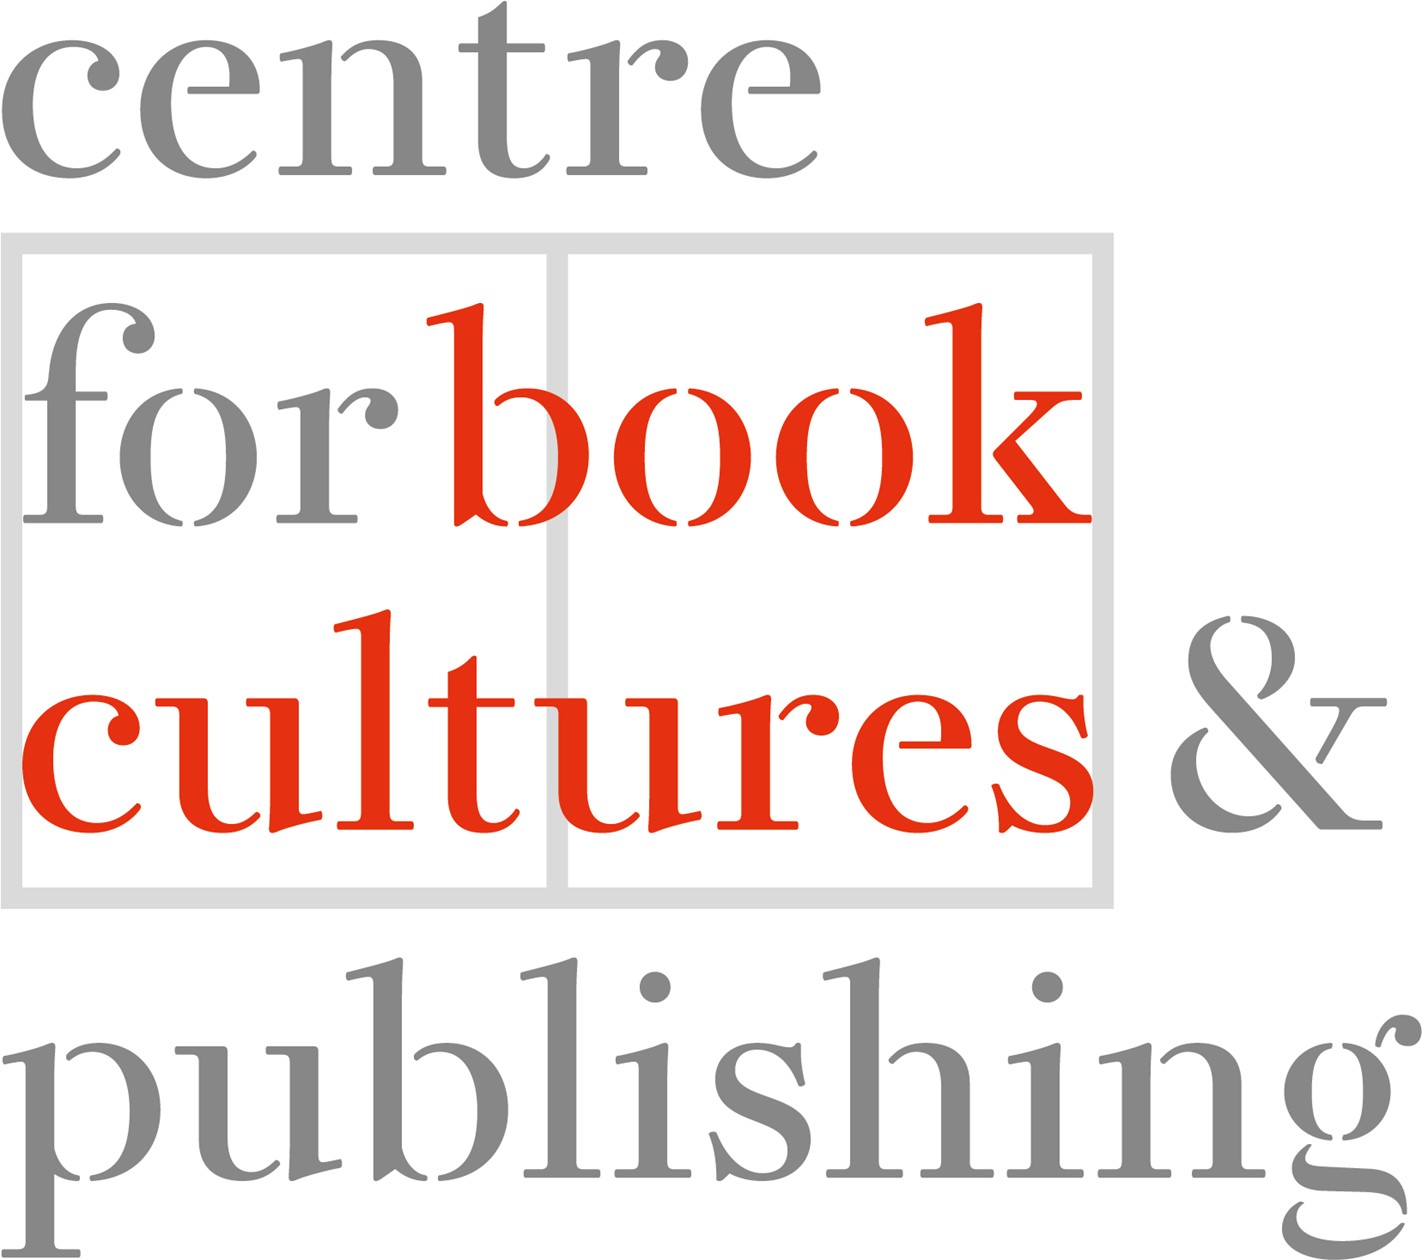 Centre for book cultures and publishing